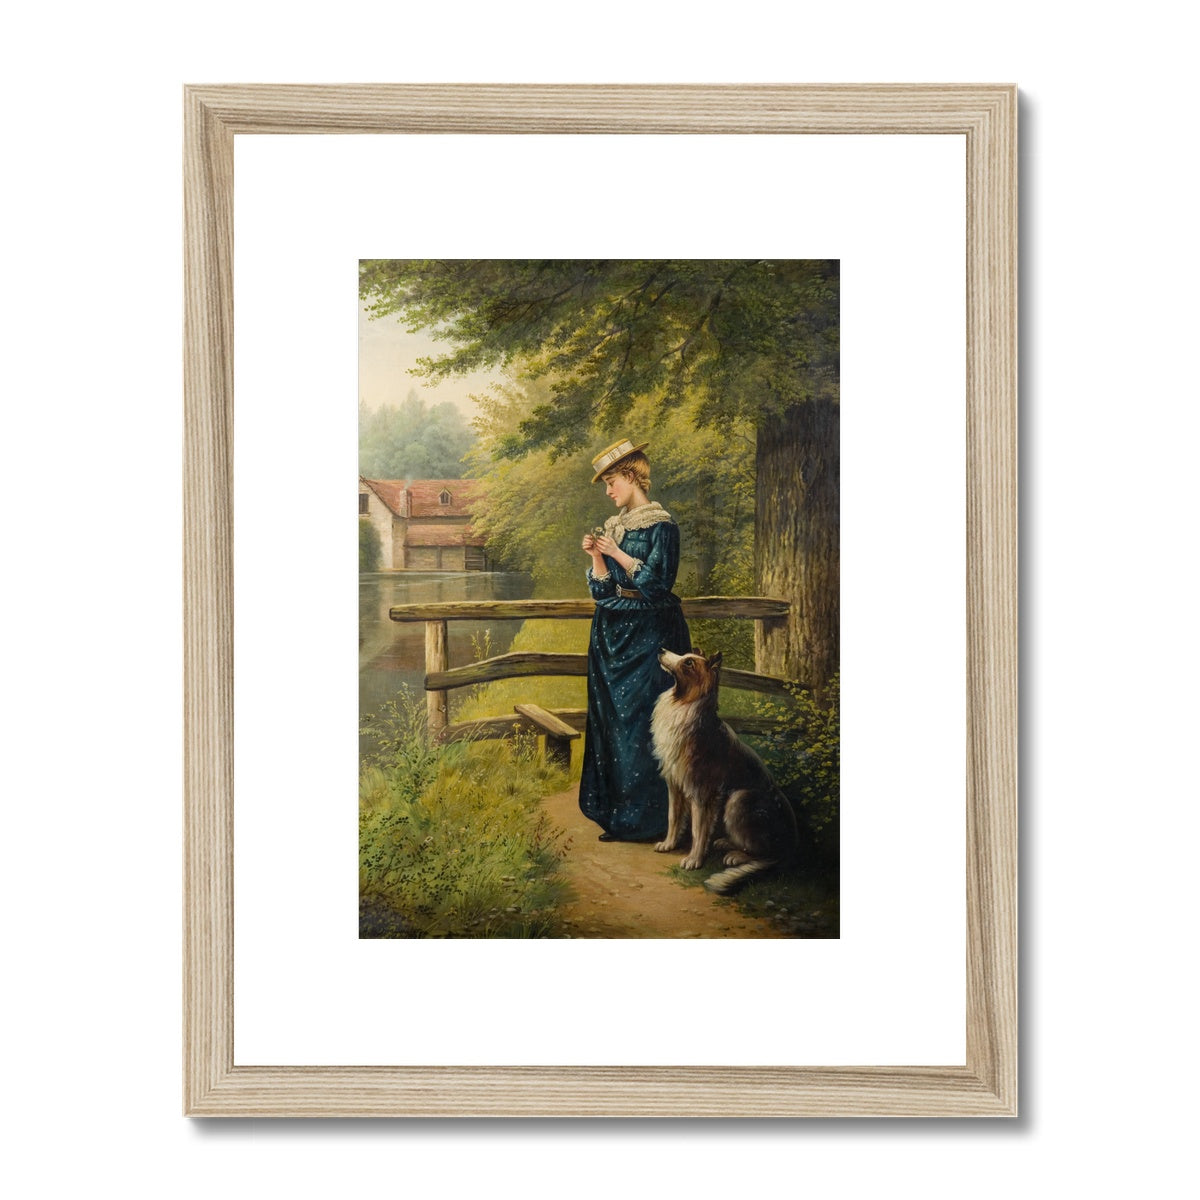 Fine Art Print Framed & Mounted - Portrait of a Woman and a Dog by Albert Drinkwater